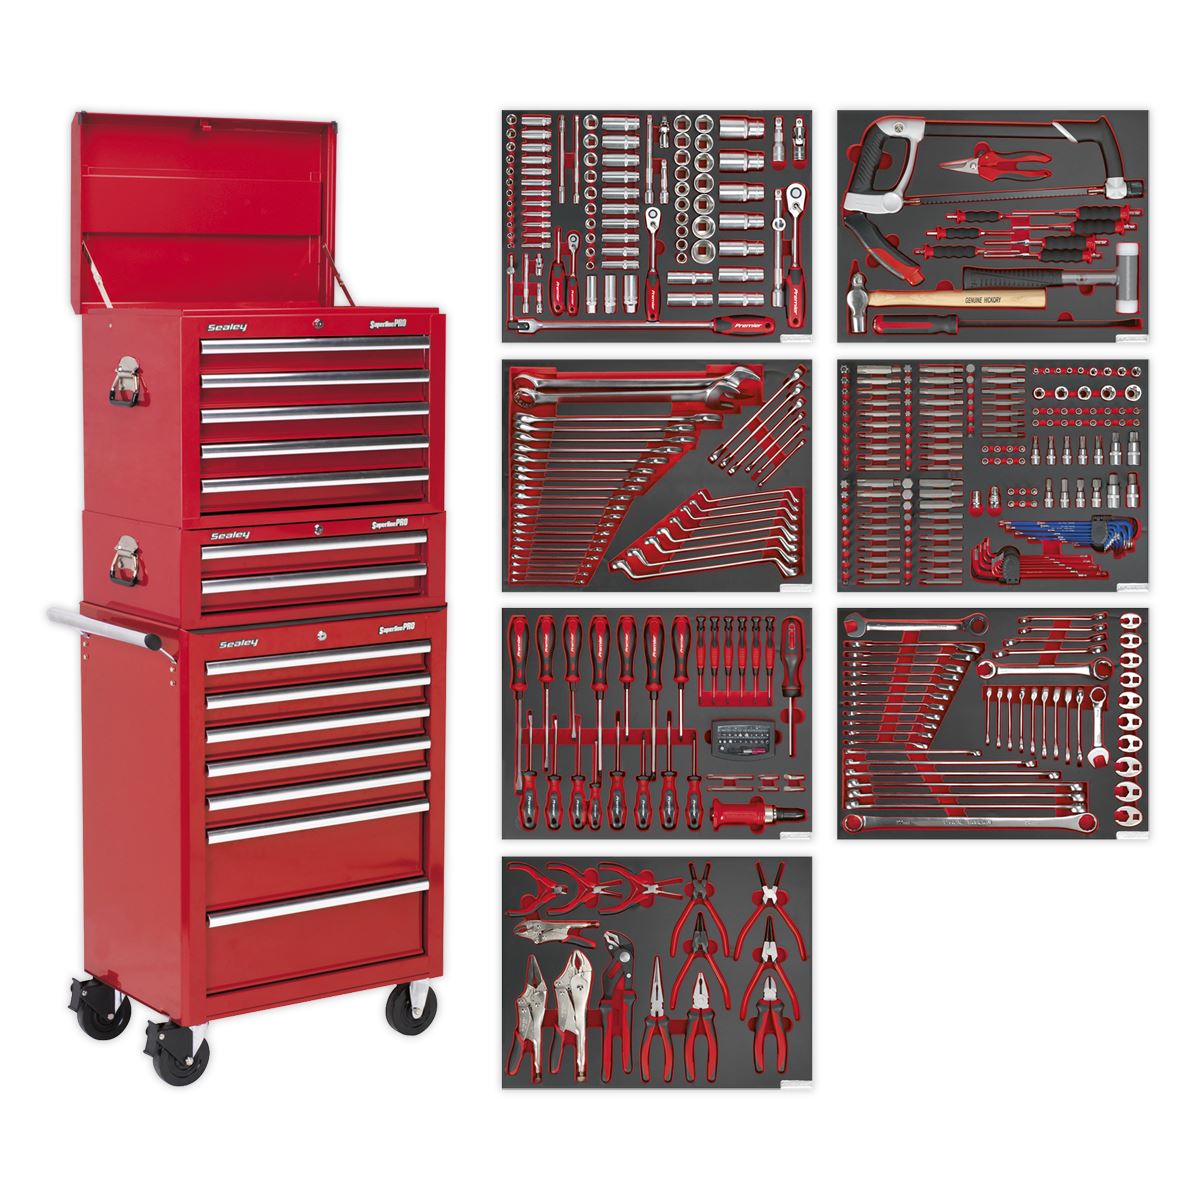 Sealey Superline Pro Tool Chest Combination 14 Drawer with Ball-Bearing Slides - Red & 446pc Tool Kit